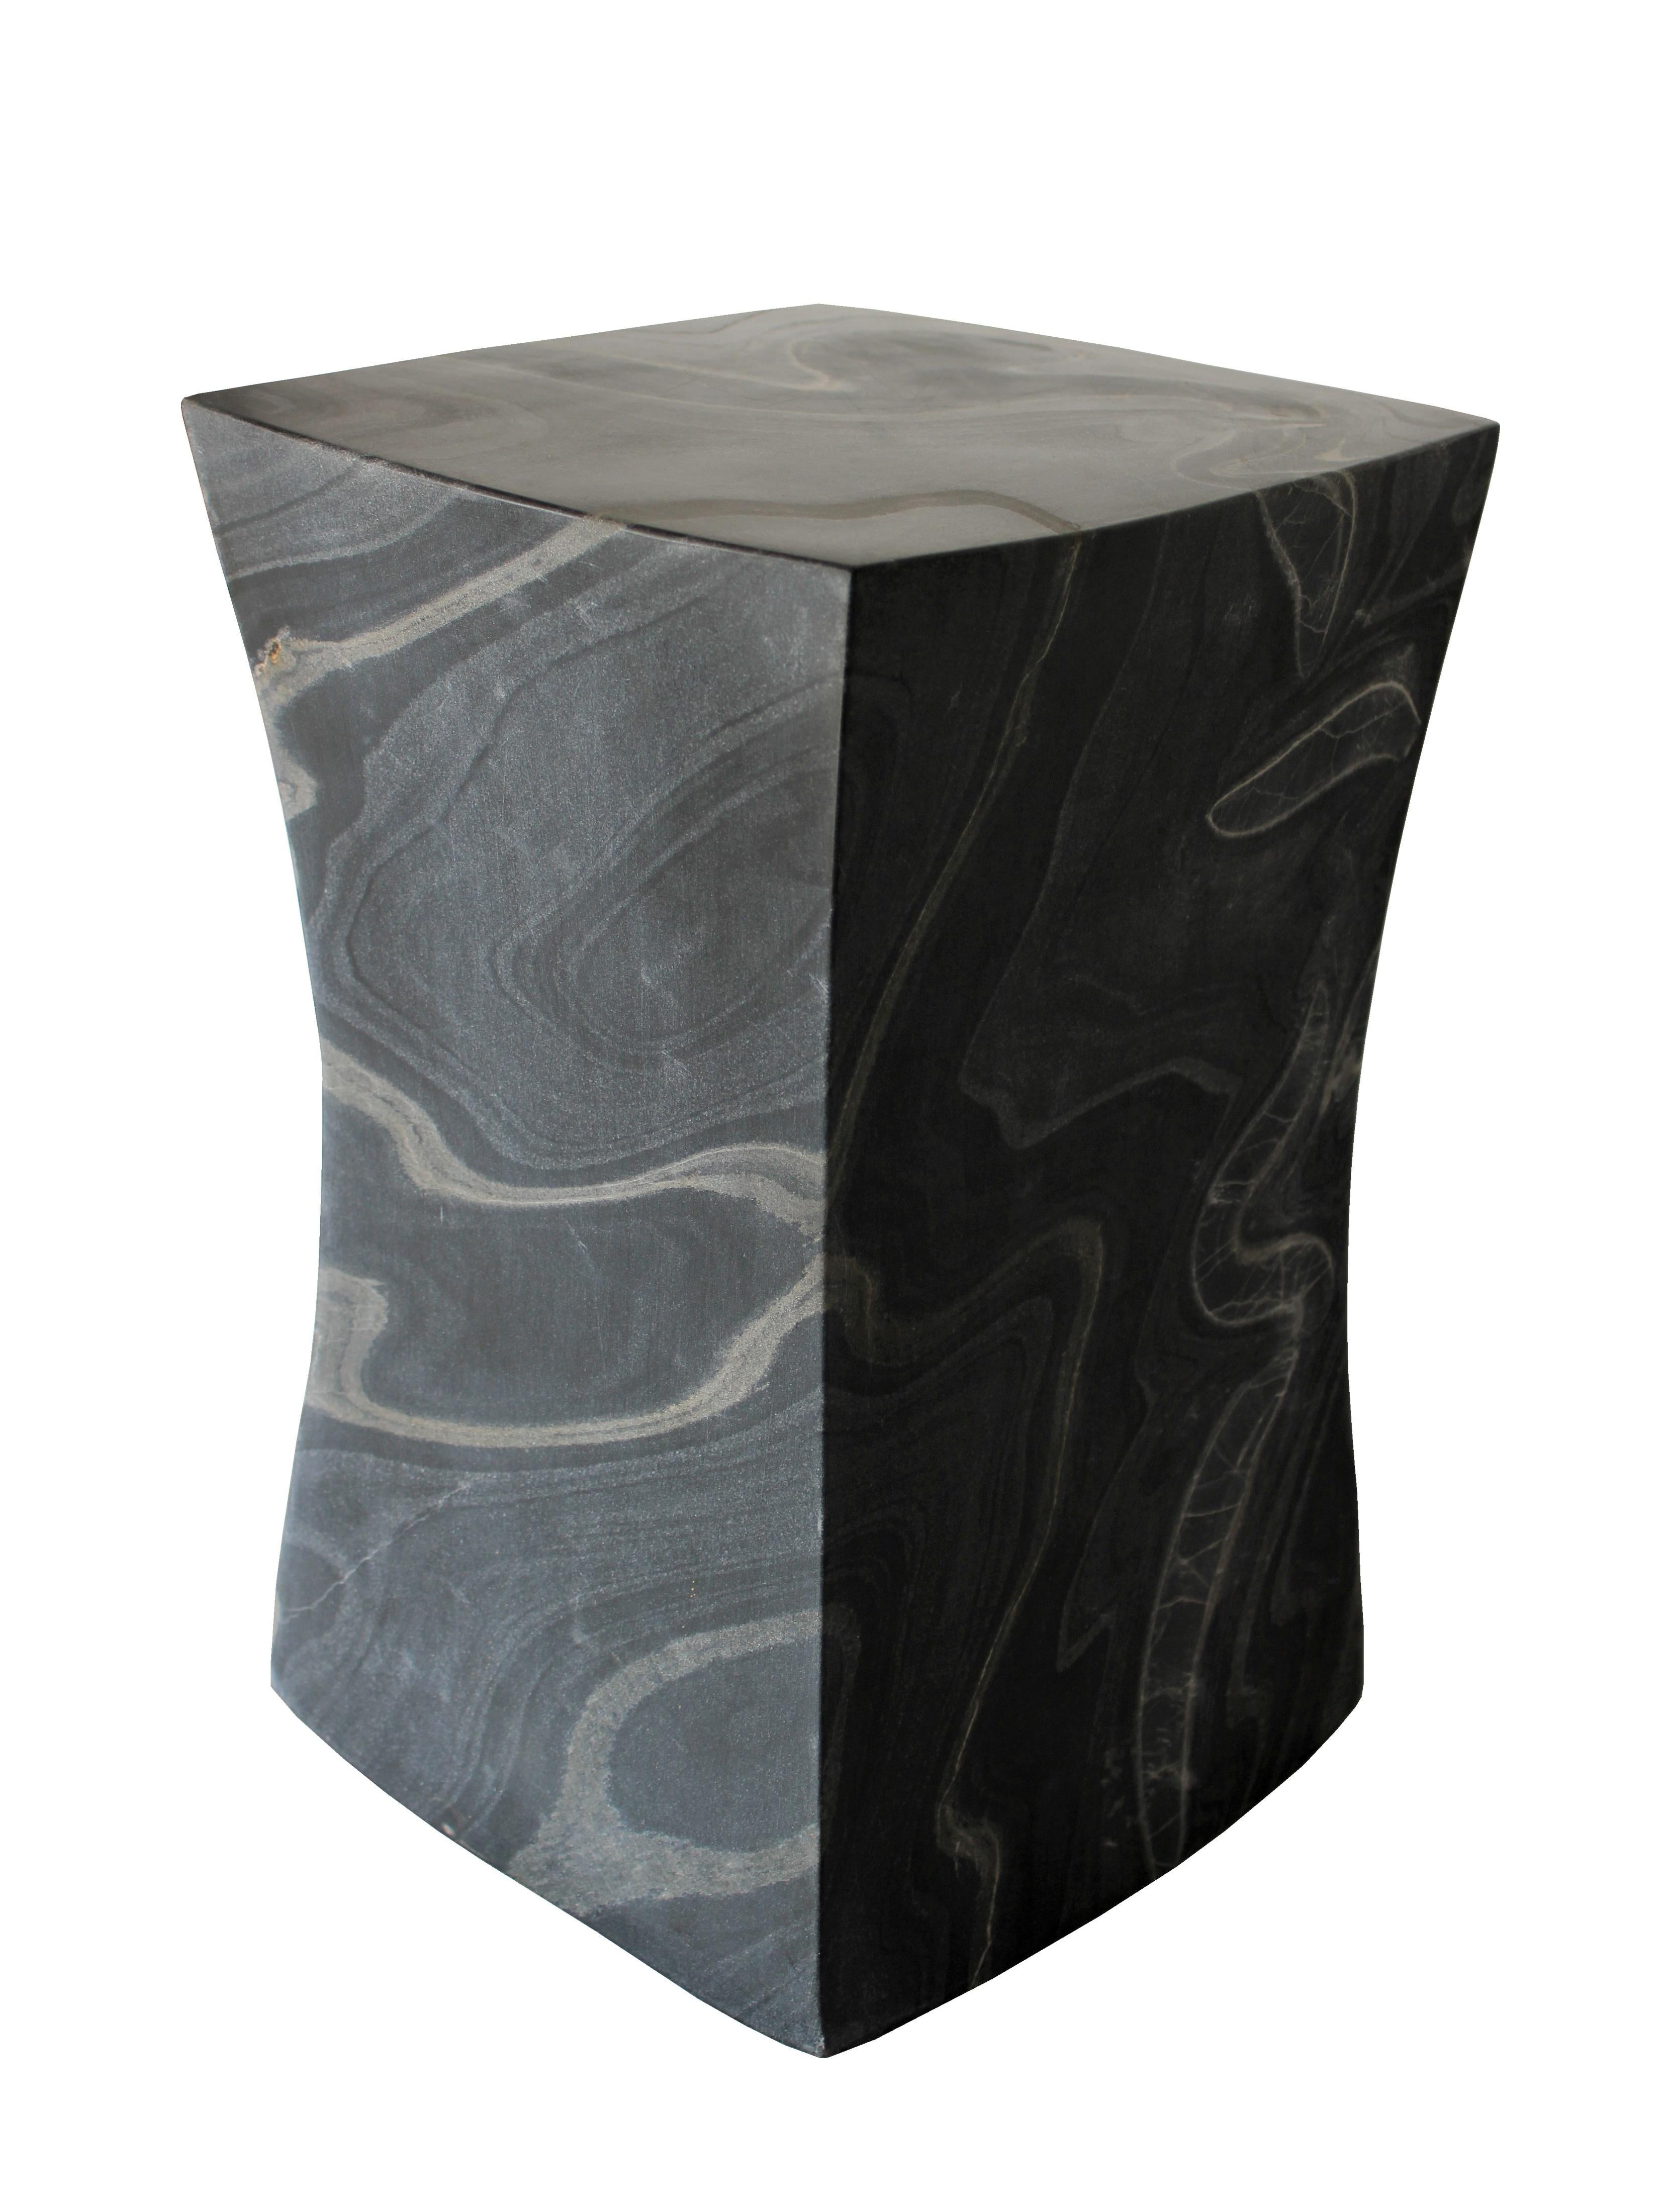 Indian Set of Two Jour Block Tables Black Marble by Paul Mathieu Handcrafted in India For Sale